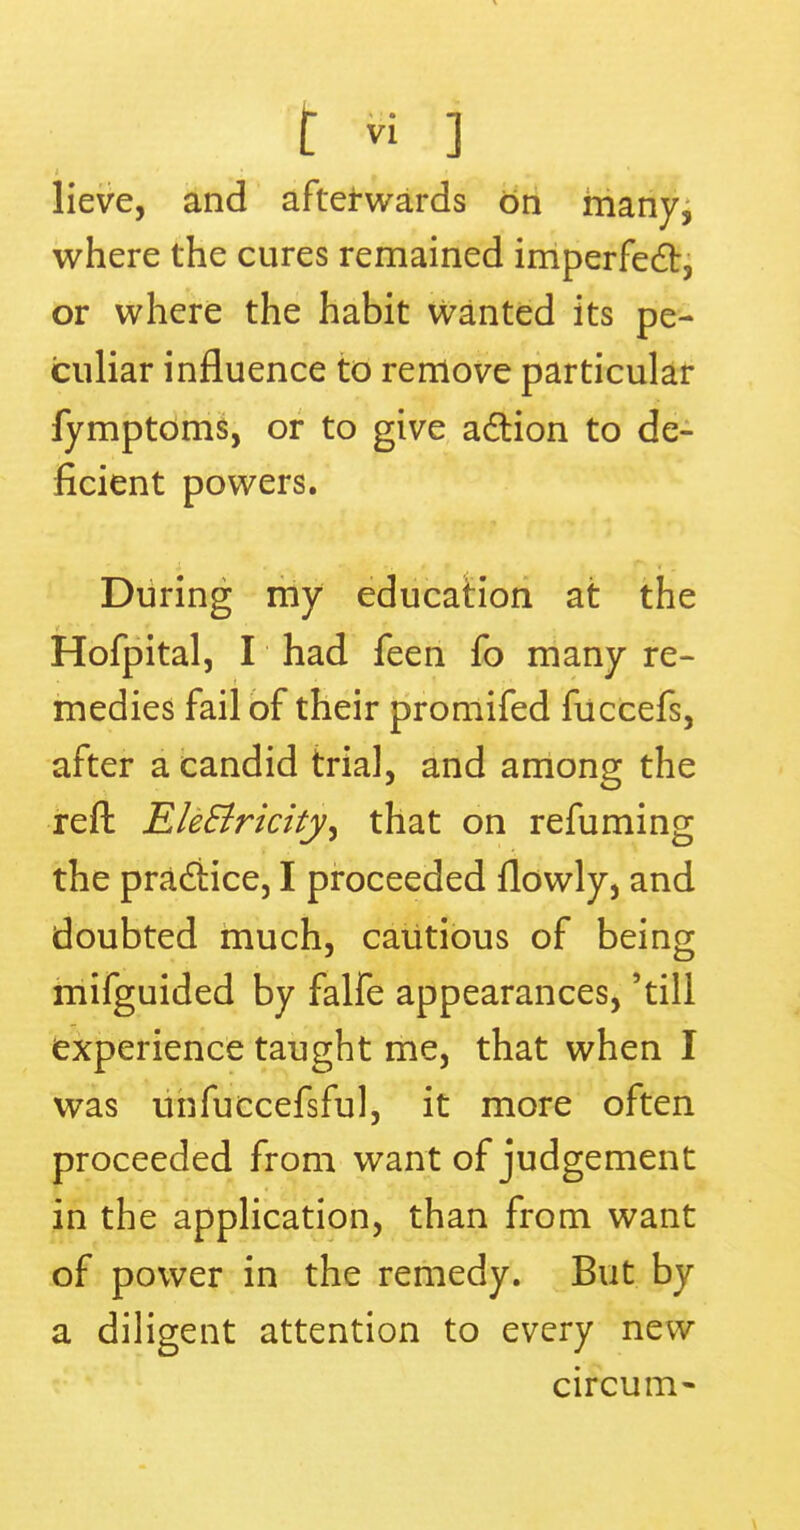 lieve, and afterwards on many, where the cures remained imperfect, or where the habit wanted its pe- culiar influence to remove particular fymptoms, or to give action to de- ficient powers. During my education at the Hofpital, I had feen fo many re- medies fail of their promifed fuccefs, after a candid trial, and among the reft Ele&ricity, that on renaming the practice, I proceeded flowly, and doubted much, cautious of being mifguided by falfe appearances, 'till experience taught me, that when I was unfuccefsful, it more often proceeded from want of judgement in the application, than from want of power in the remedy. But by a diligent attention to every new circum-